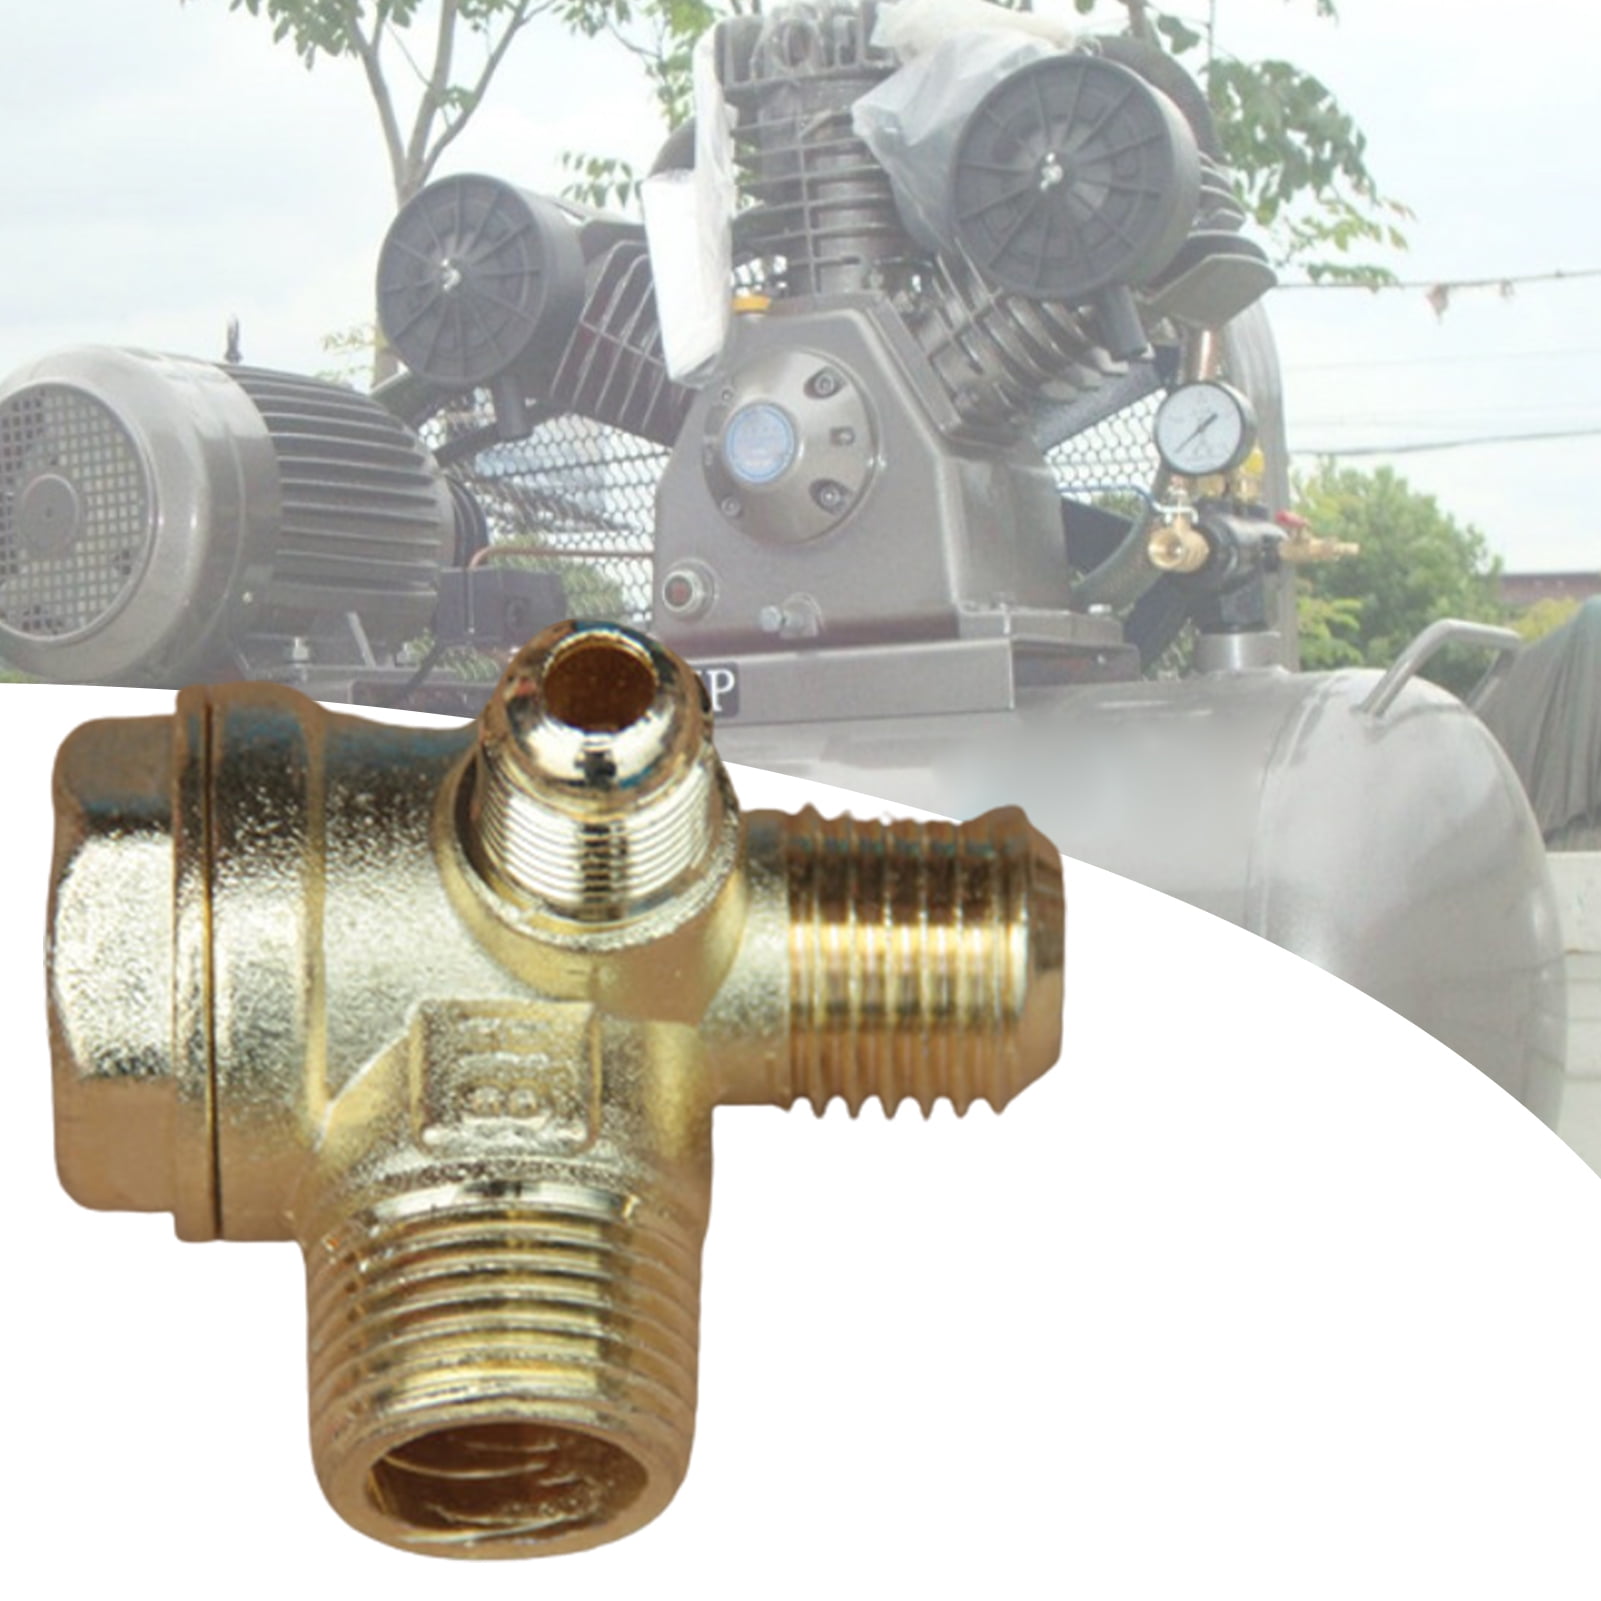 Brass 3-way Unidirectional Check Valve Connect Pipe Fittings for Air Compressor 